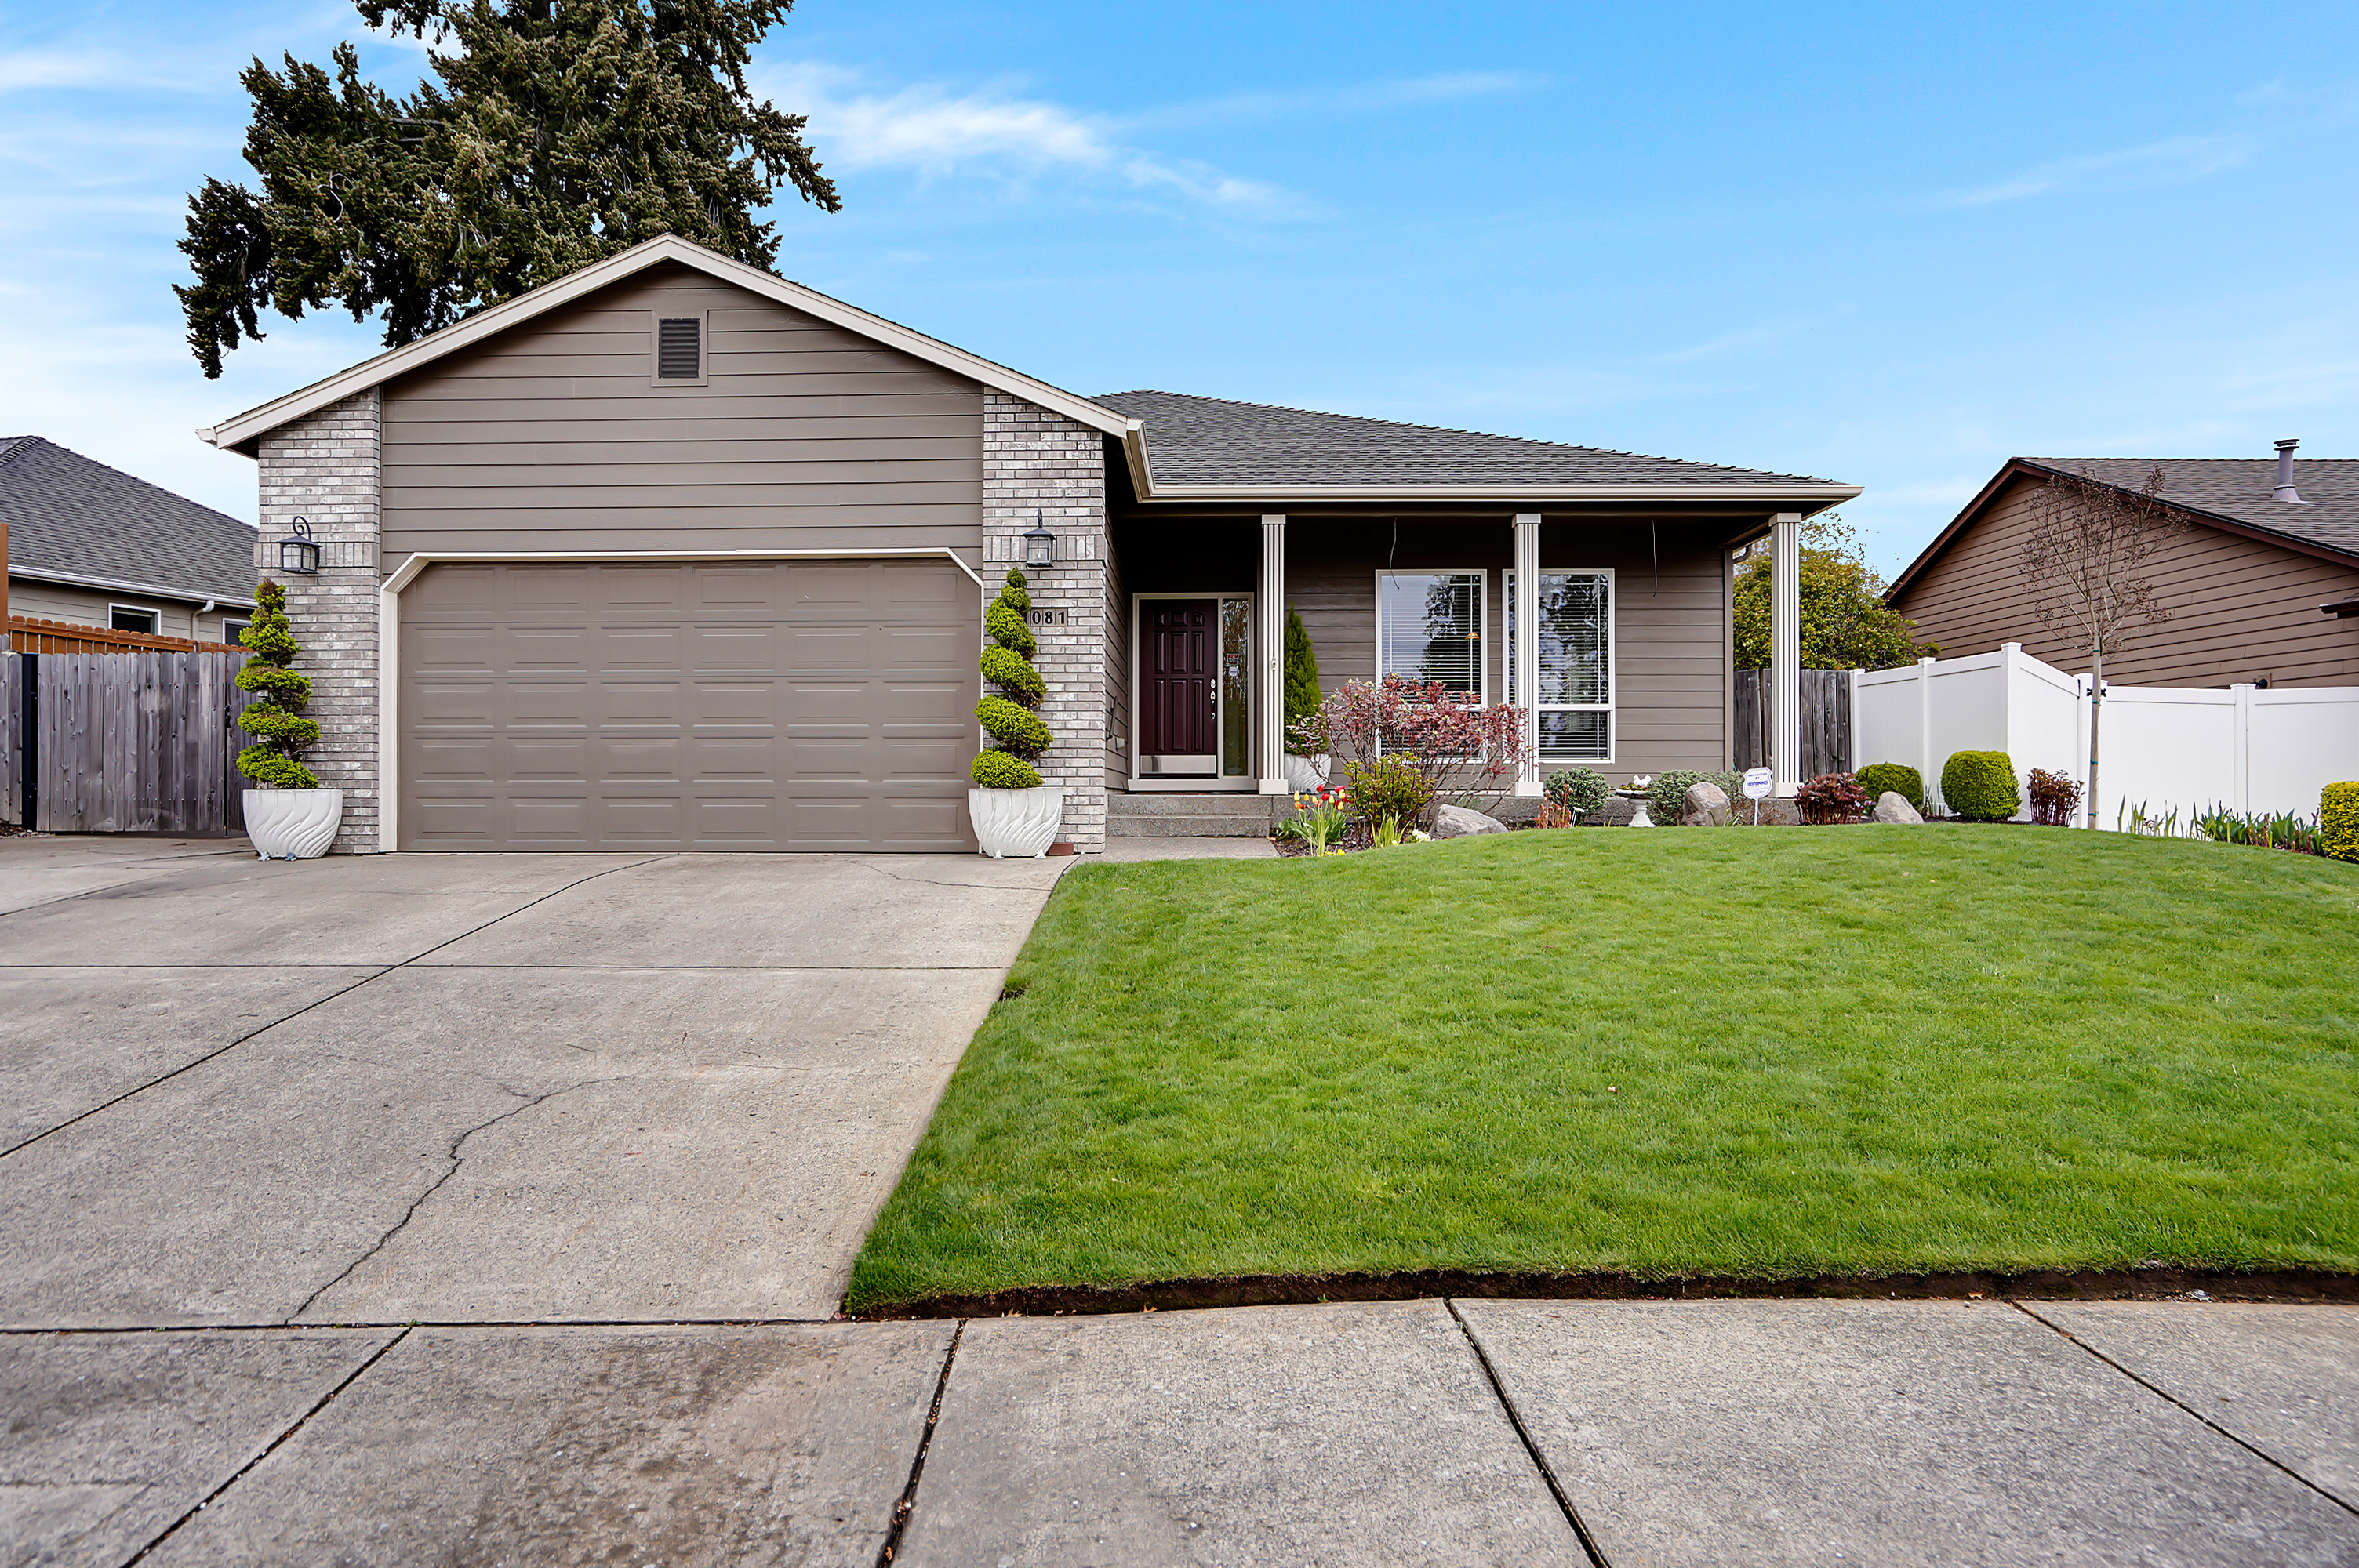 1081 Orchardview Ave NW, Salem | $480,000